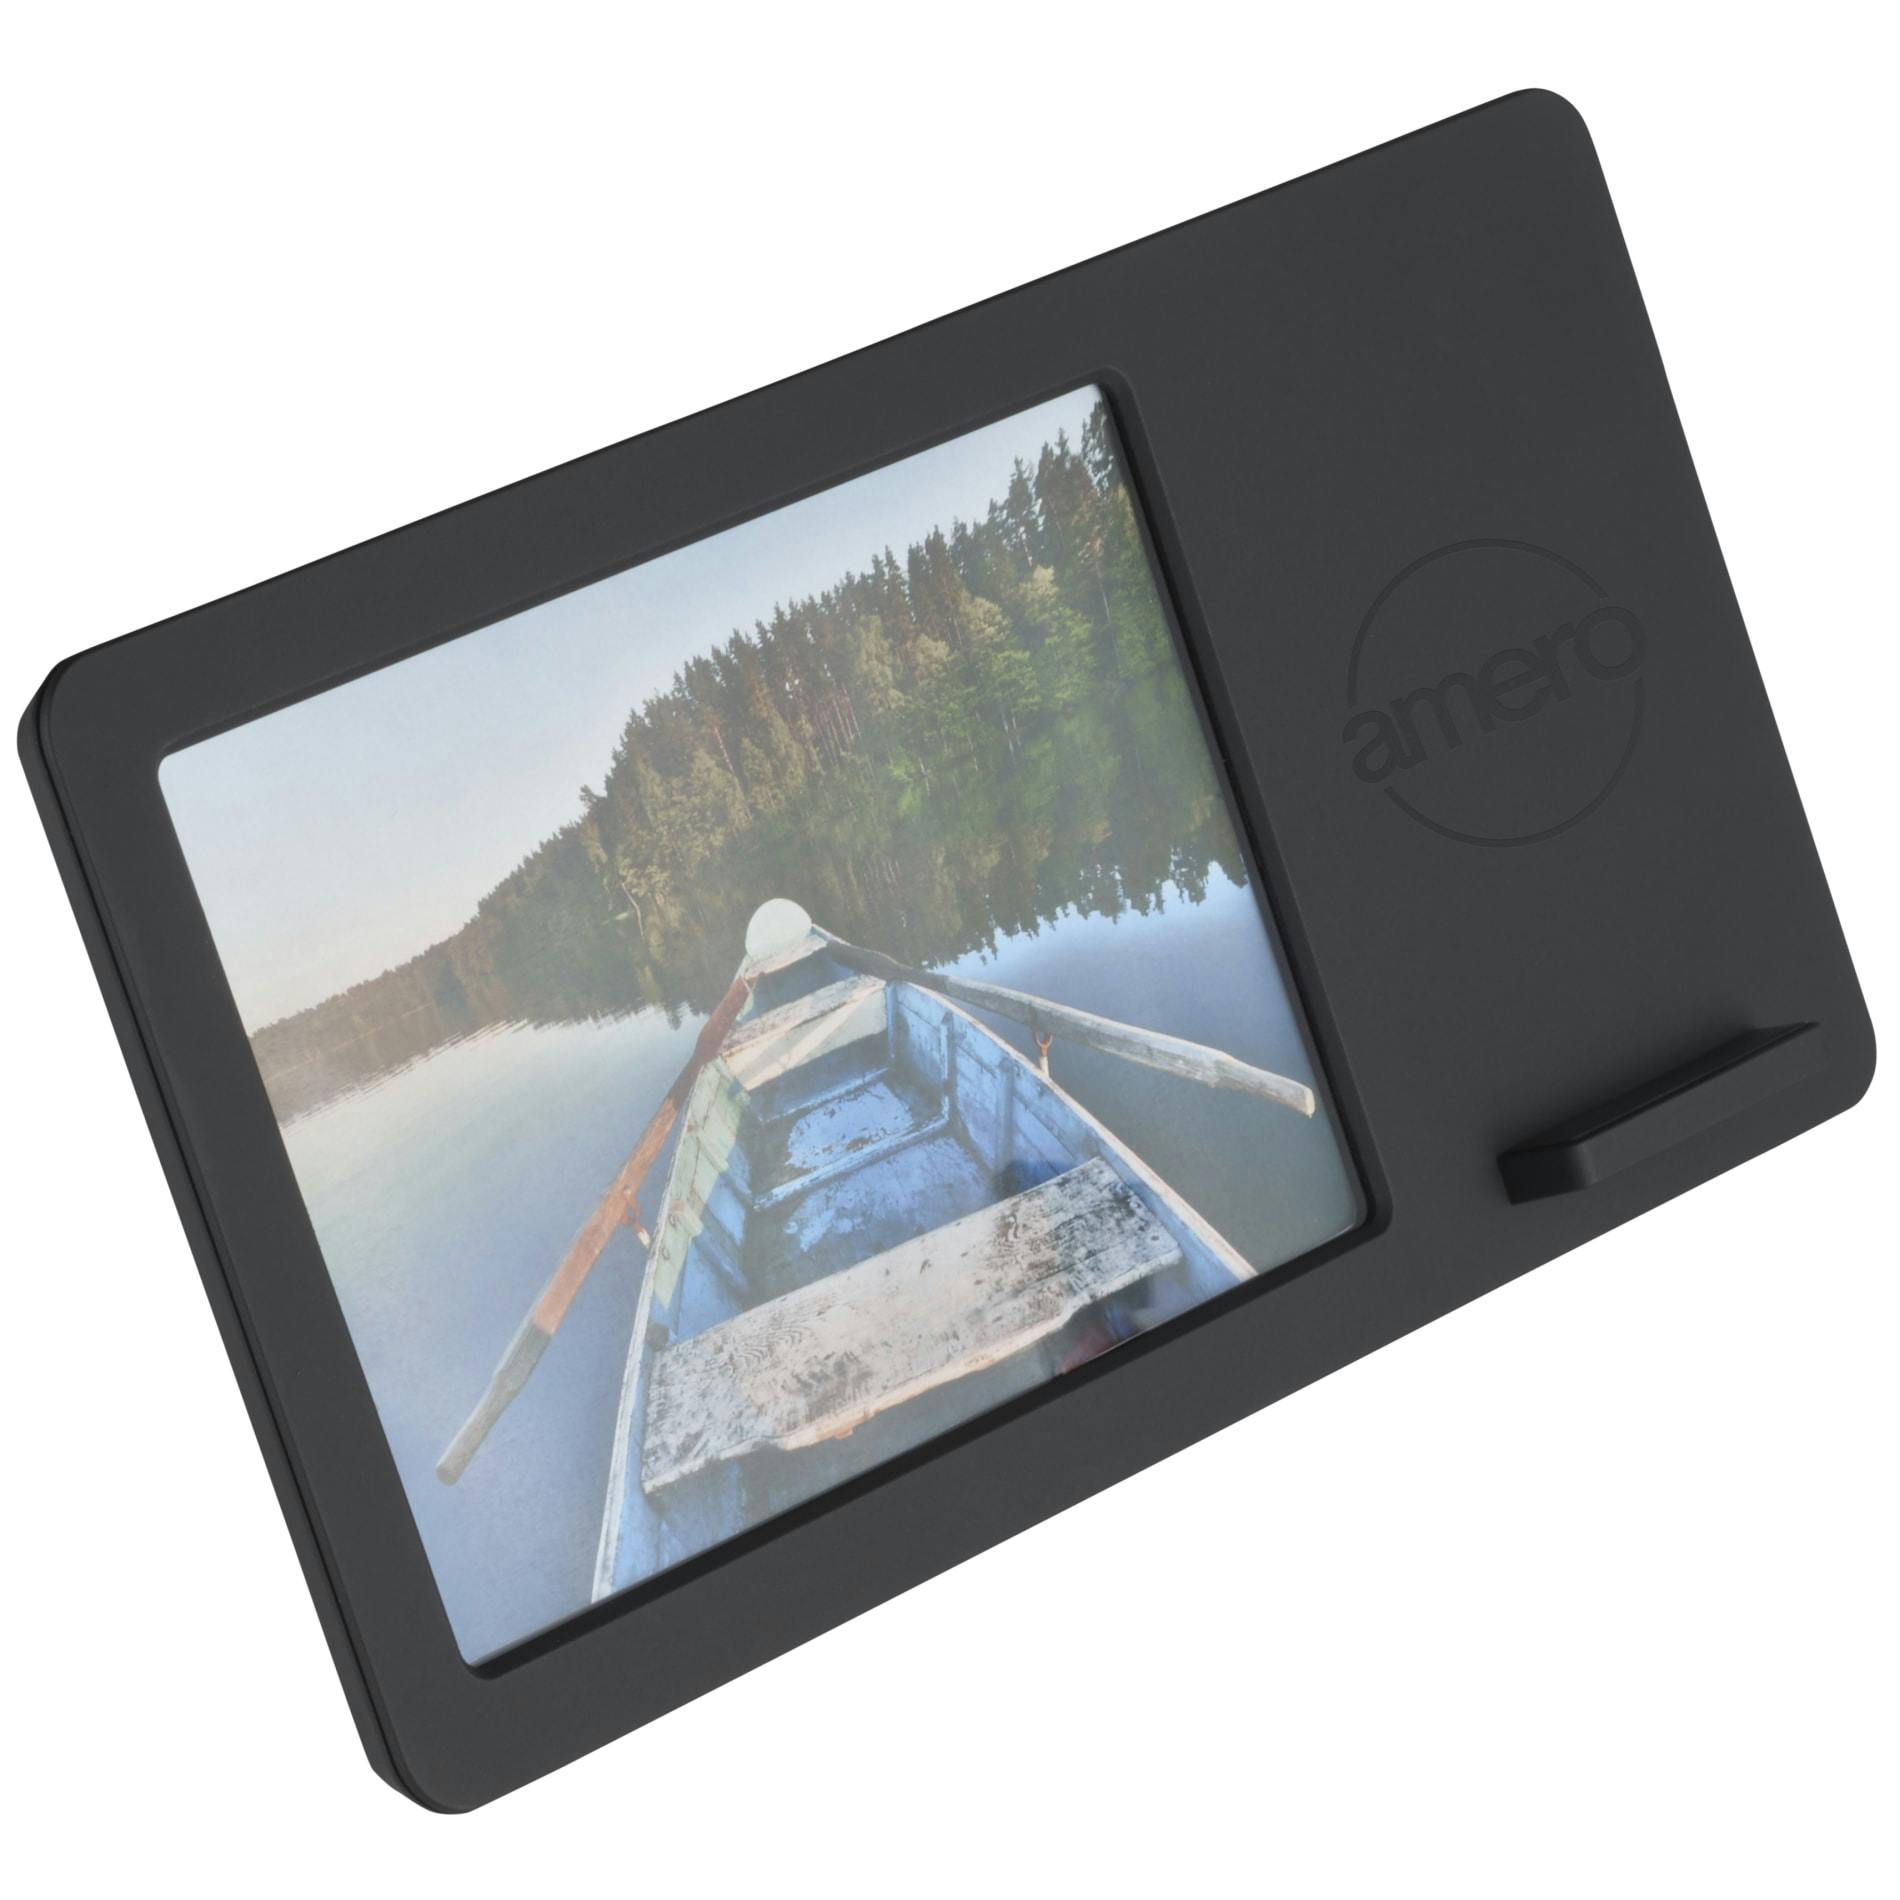 Glimpse Photo Frame with Wireless Charging Pad - additional Image 4